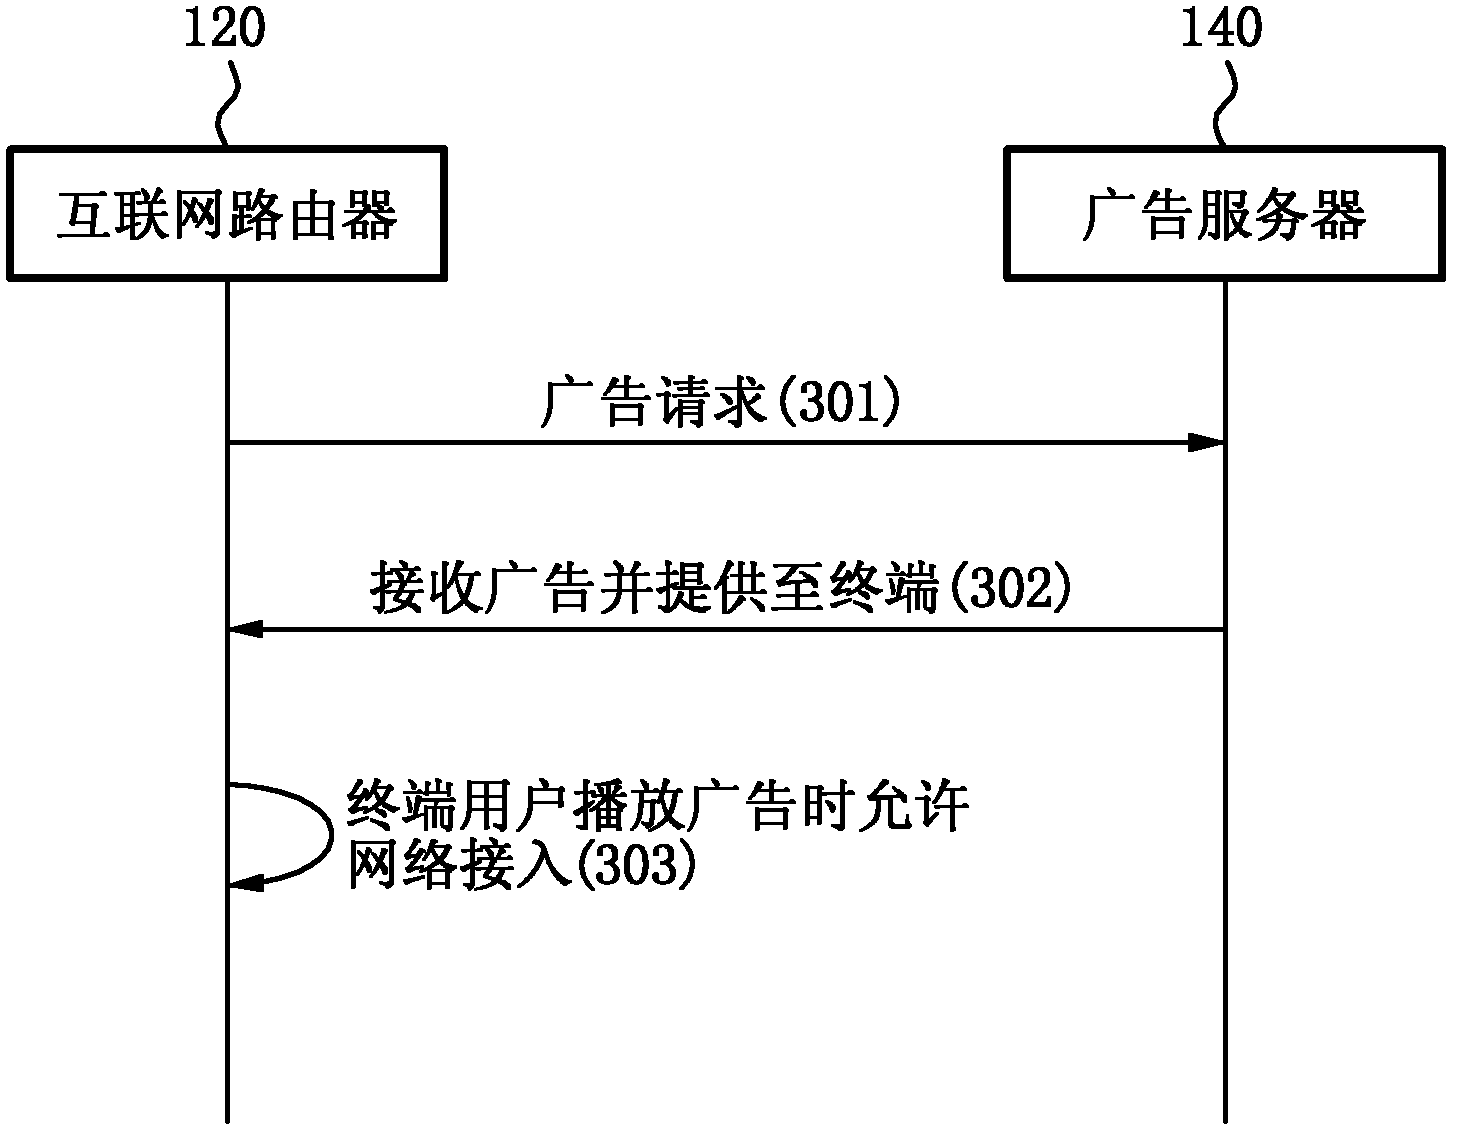 Communication system and method for controlling network access through access point by using advertisement